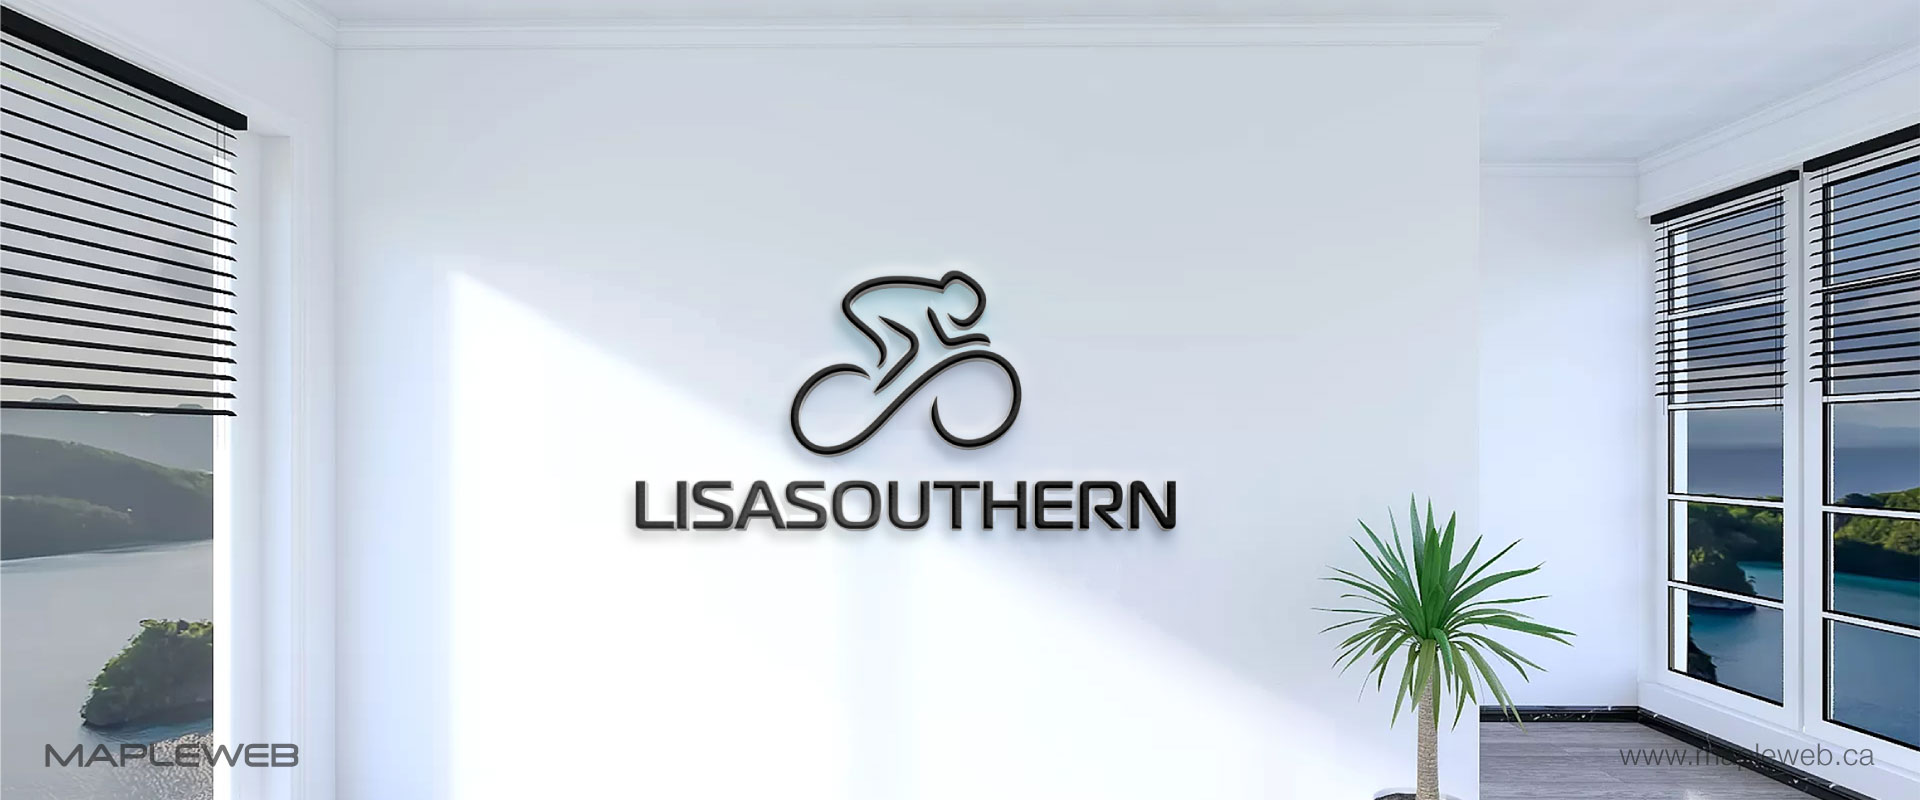 lisa-southern-brand-logo-design-by-mapleweb-vancouver-canada-3d-white-mock